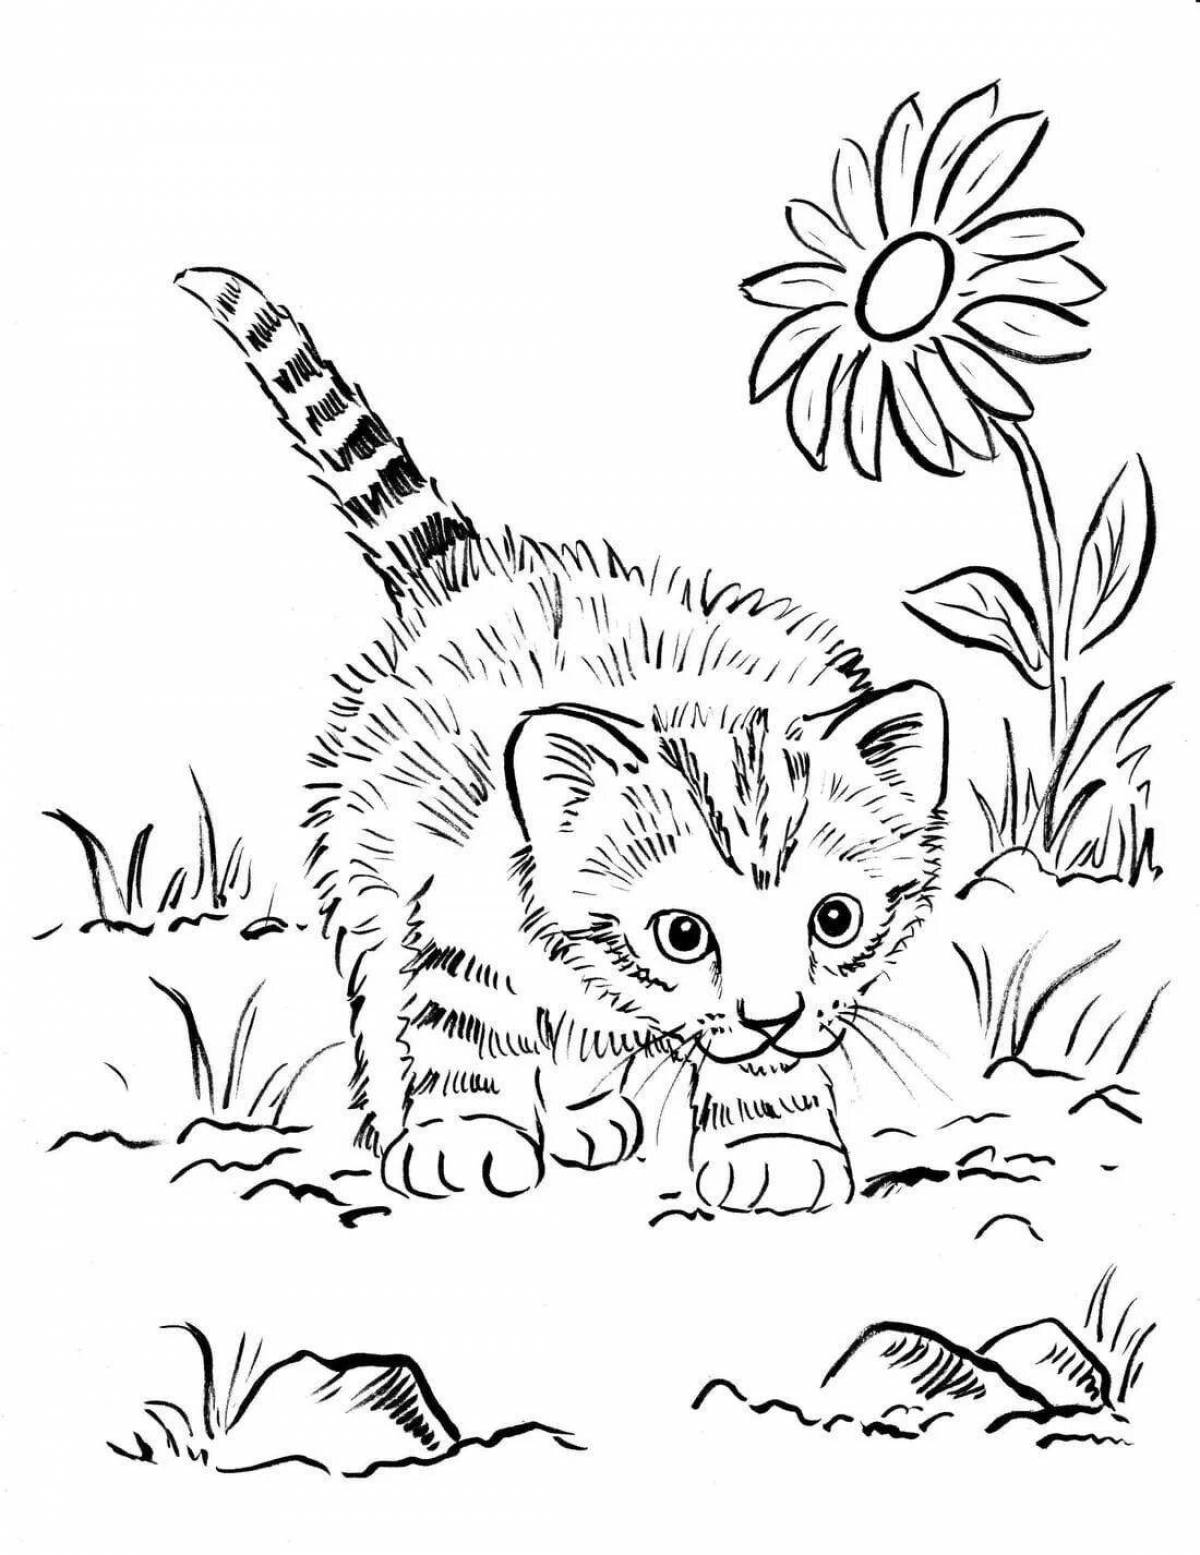 Amazing coloring pages for 6-7 year olds with cats